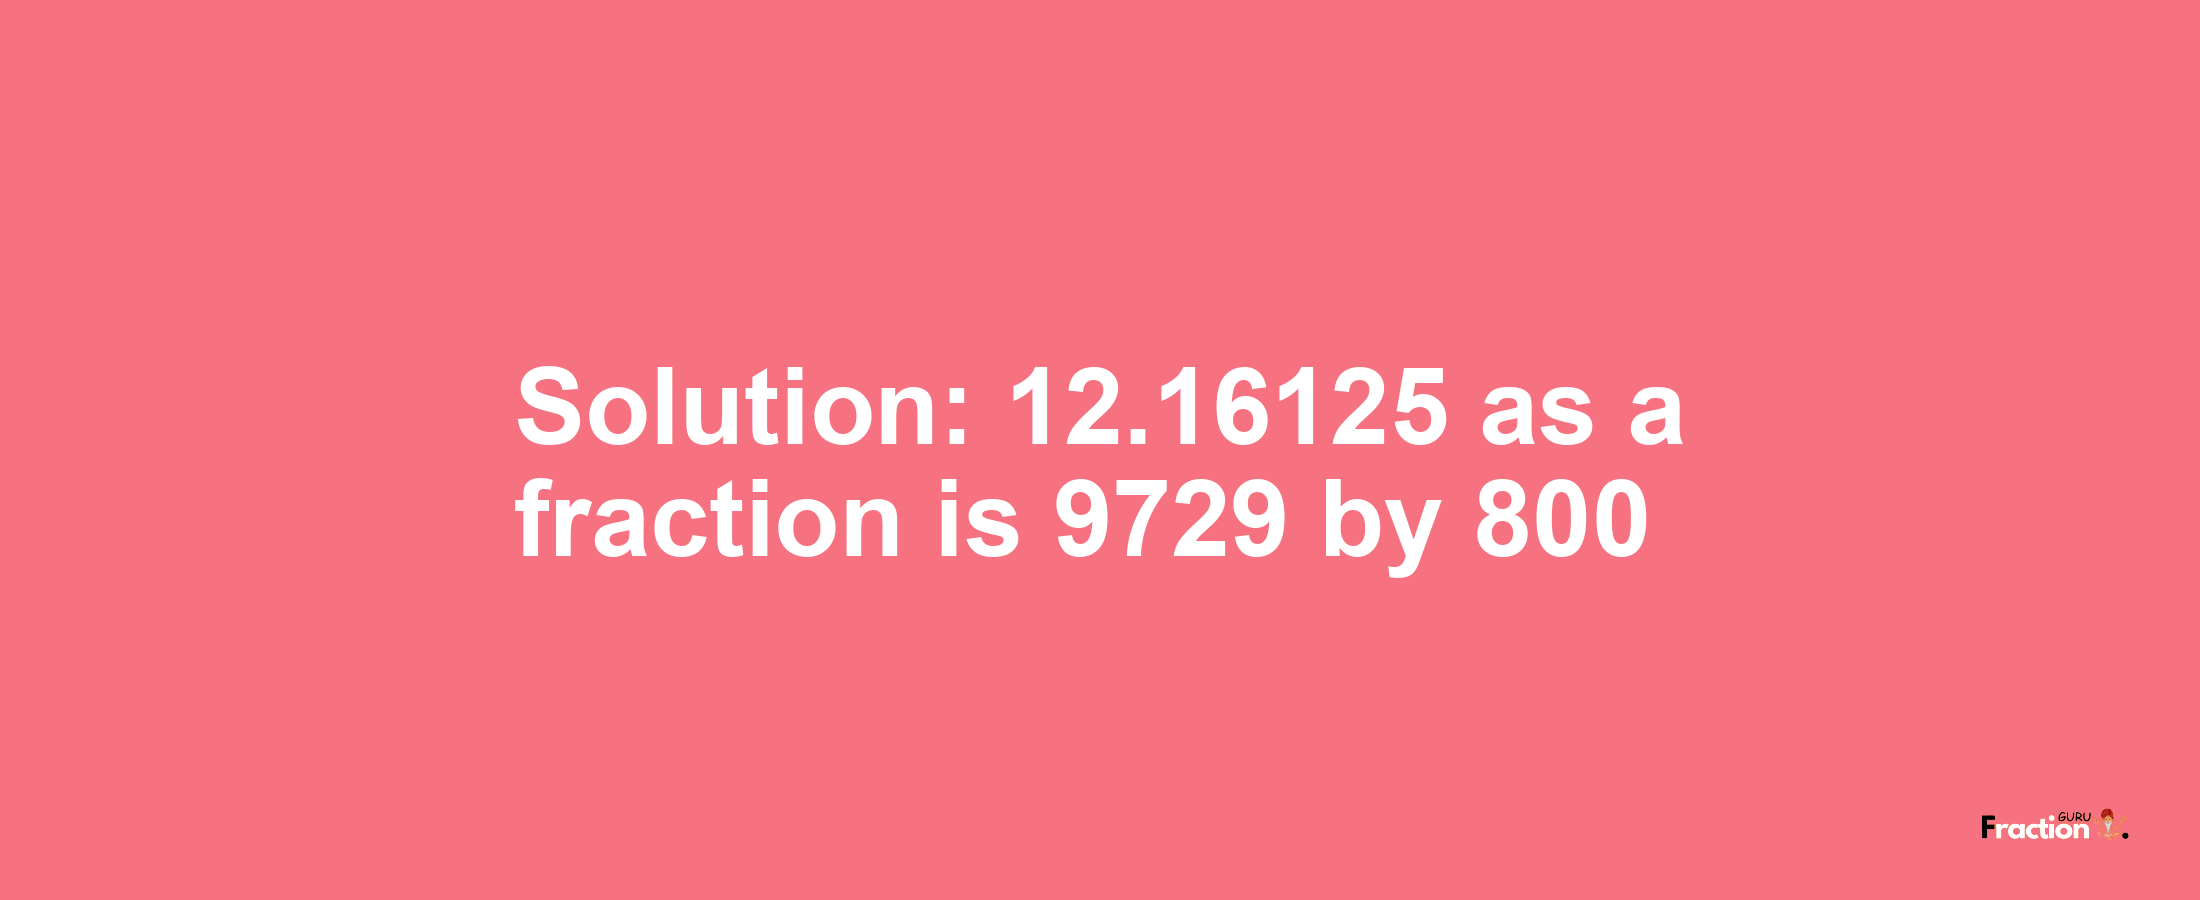 Solution:12.16125 as a fraction is 9729/800